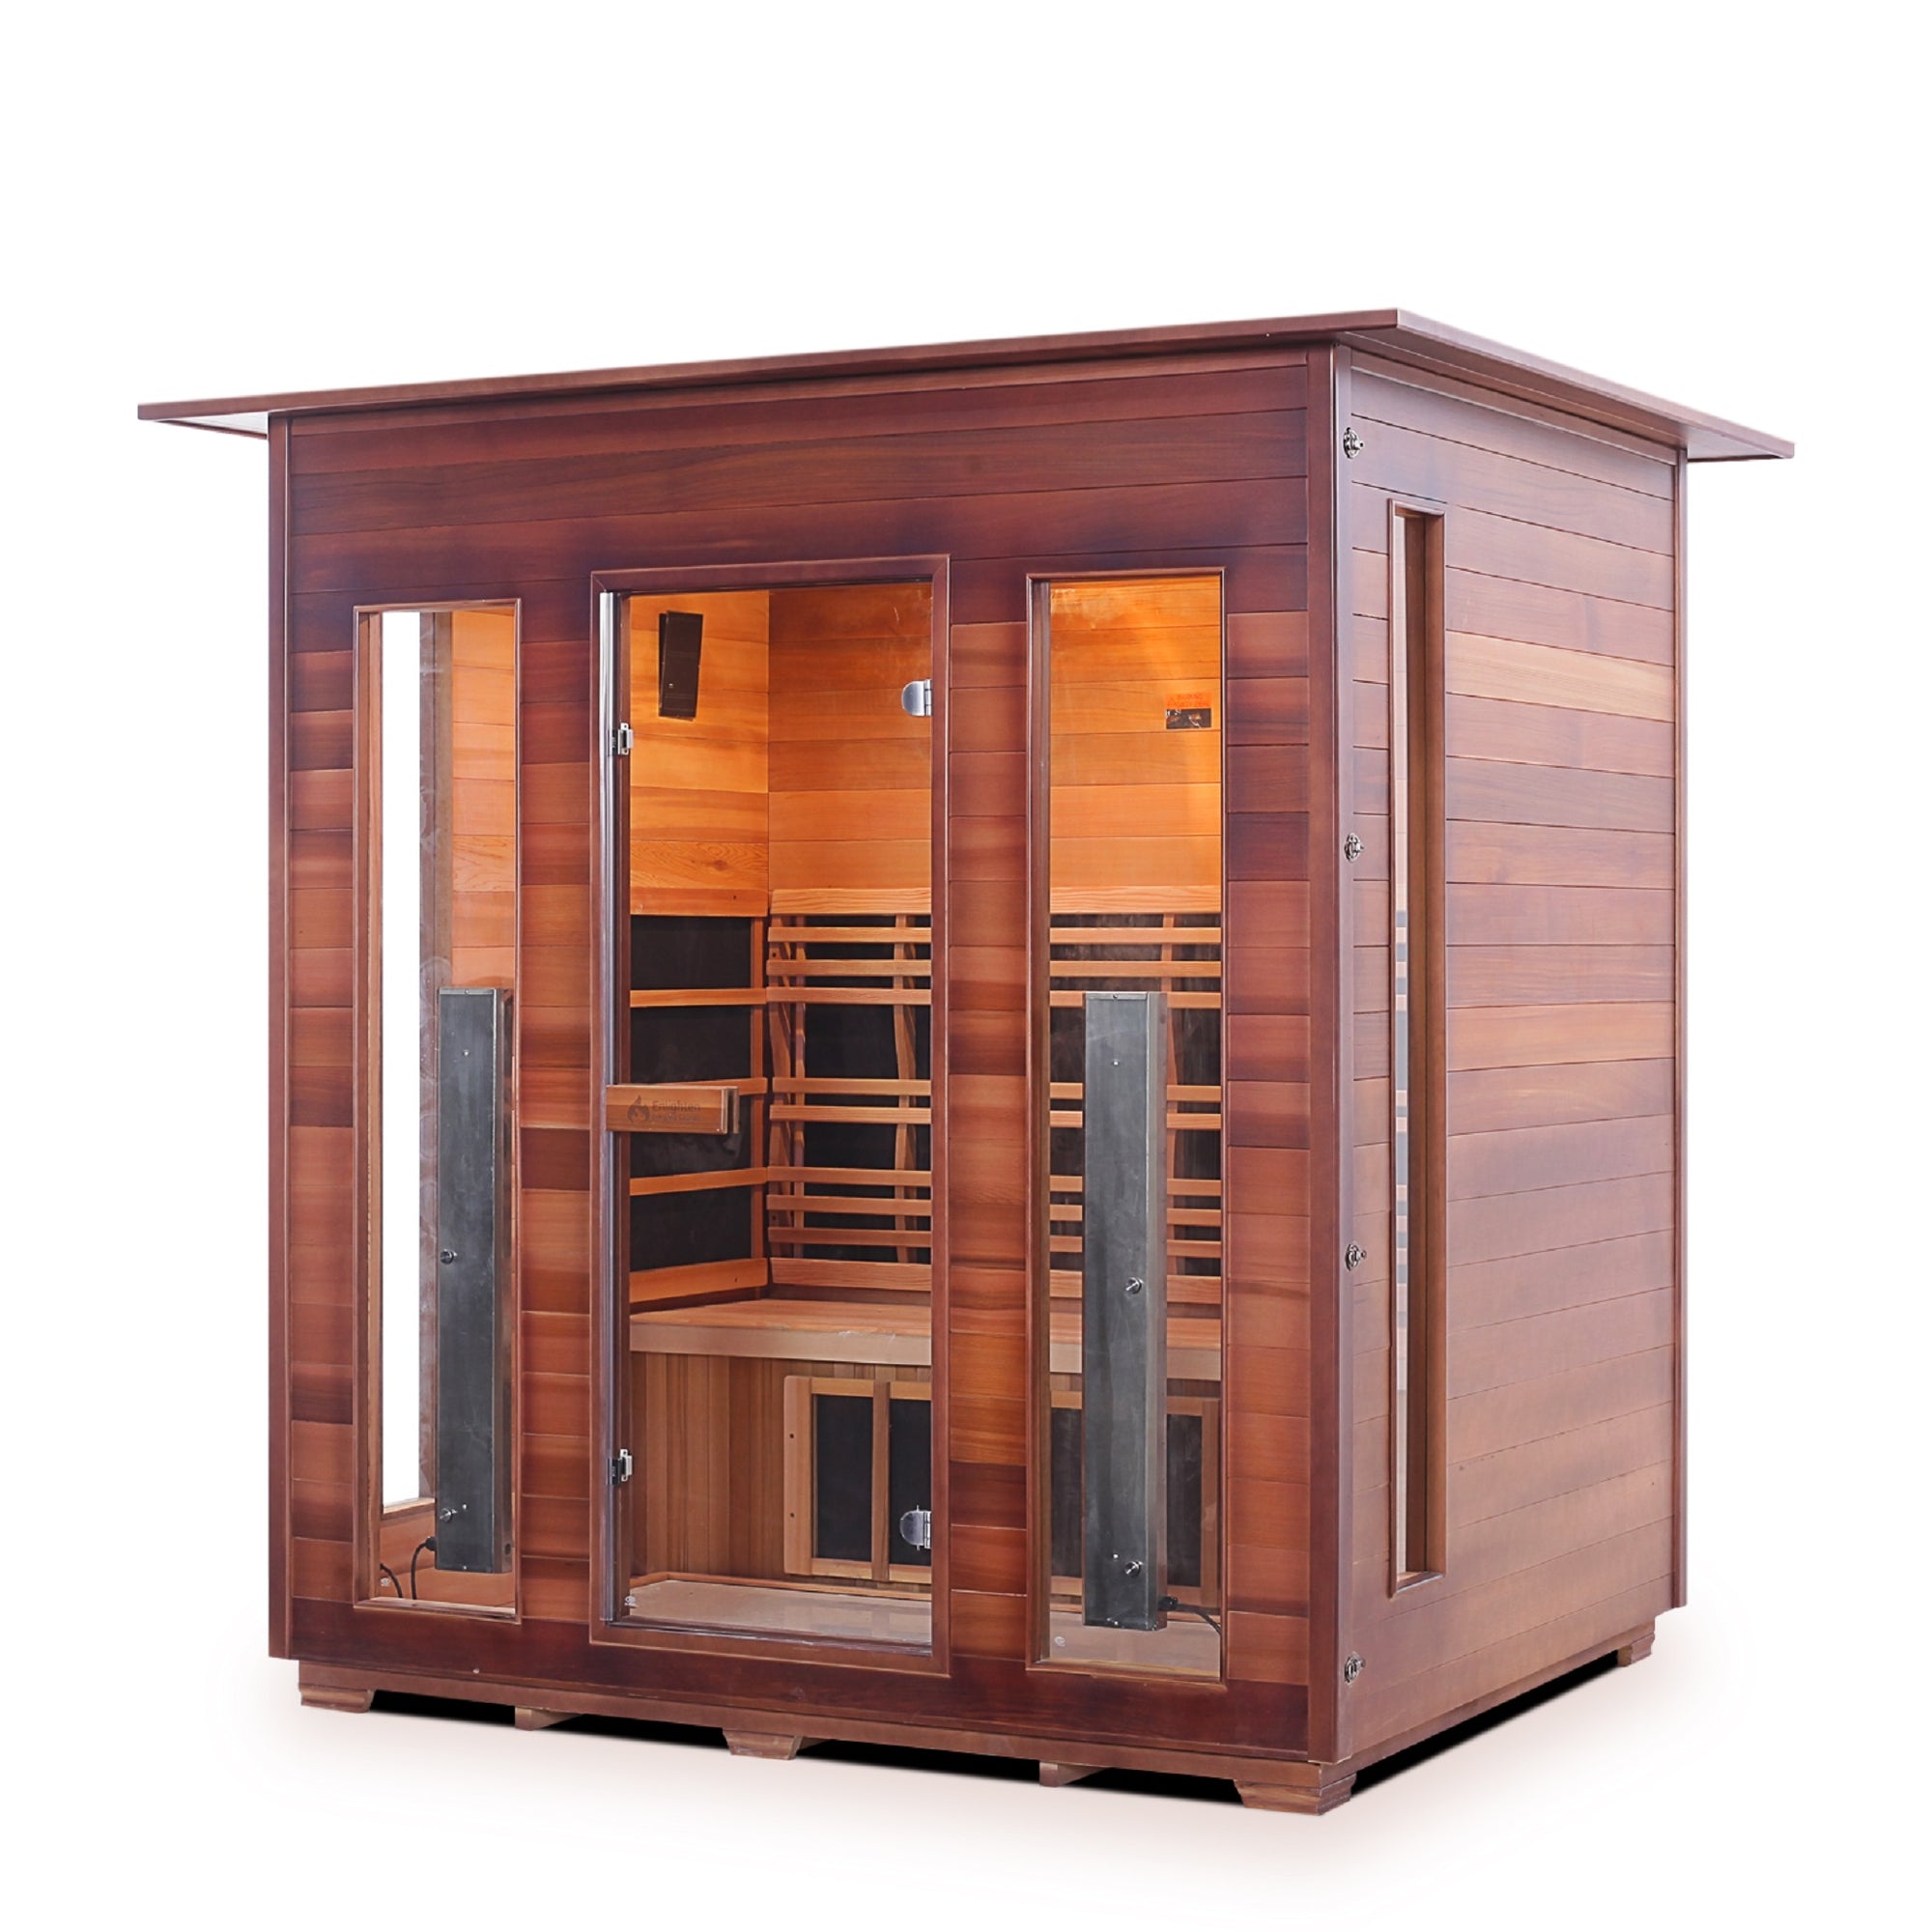 InfraNature Original Infrared Rustic 4 Person Indoor Canadian Red Cedar Wood Outside And Inside with indoor roof and glass door and windows front view